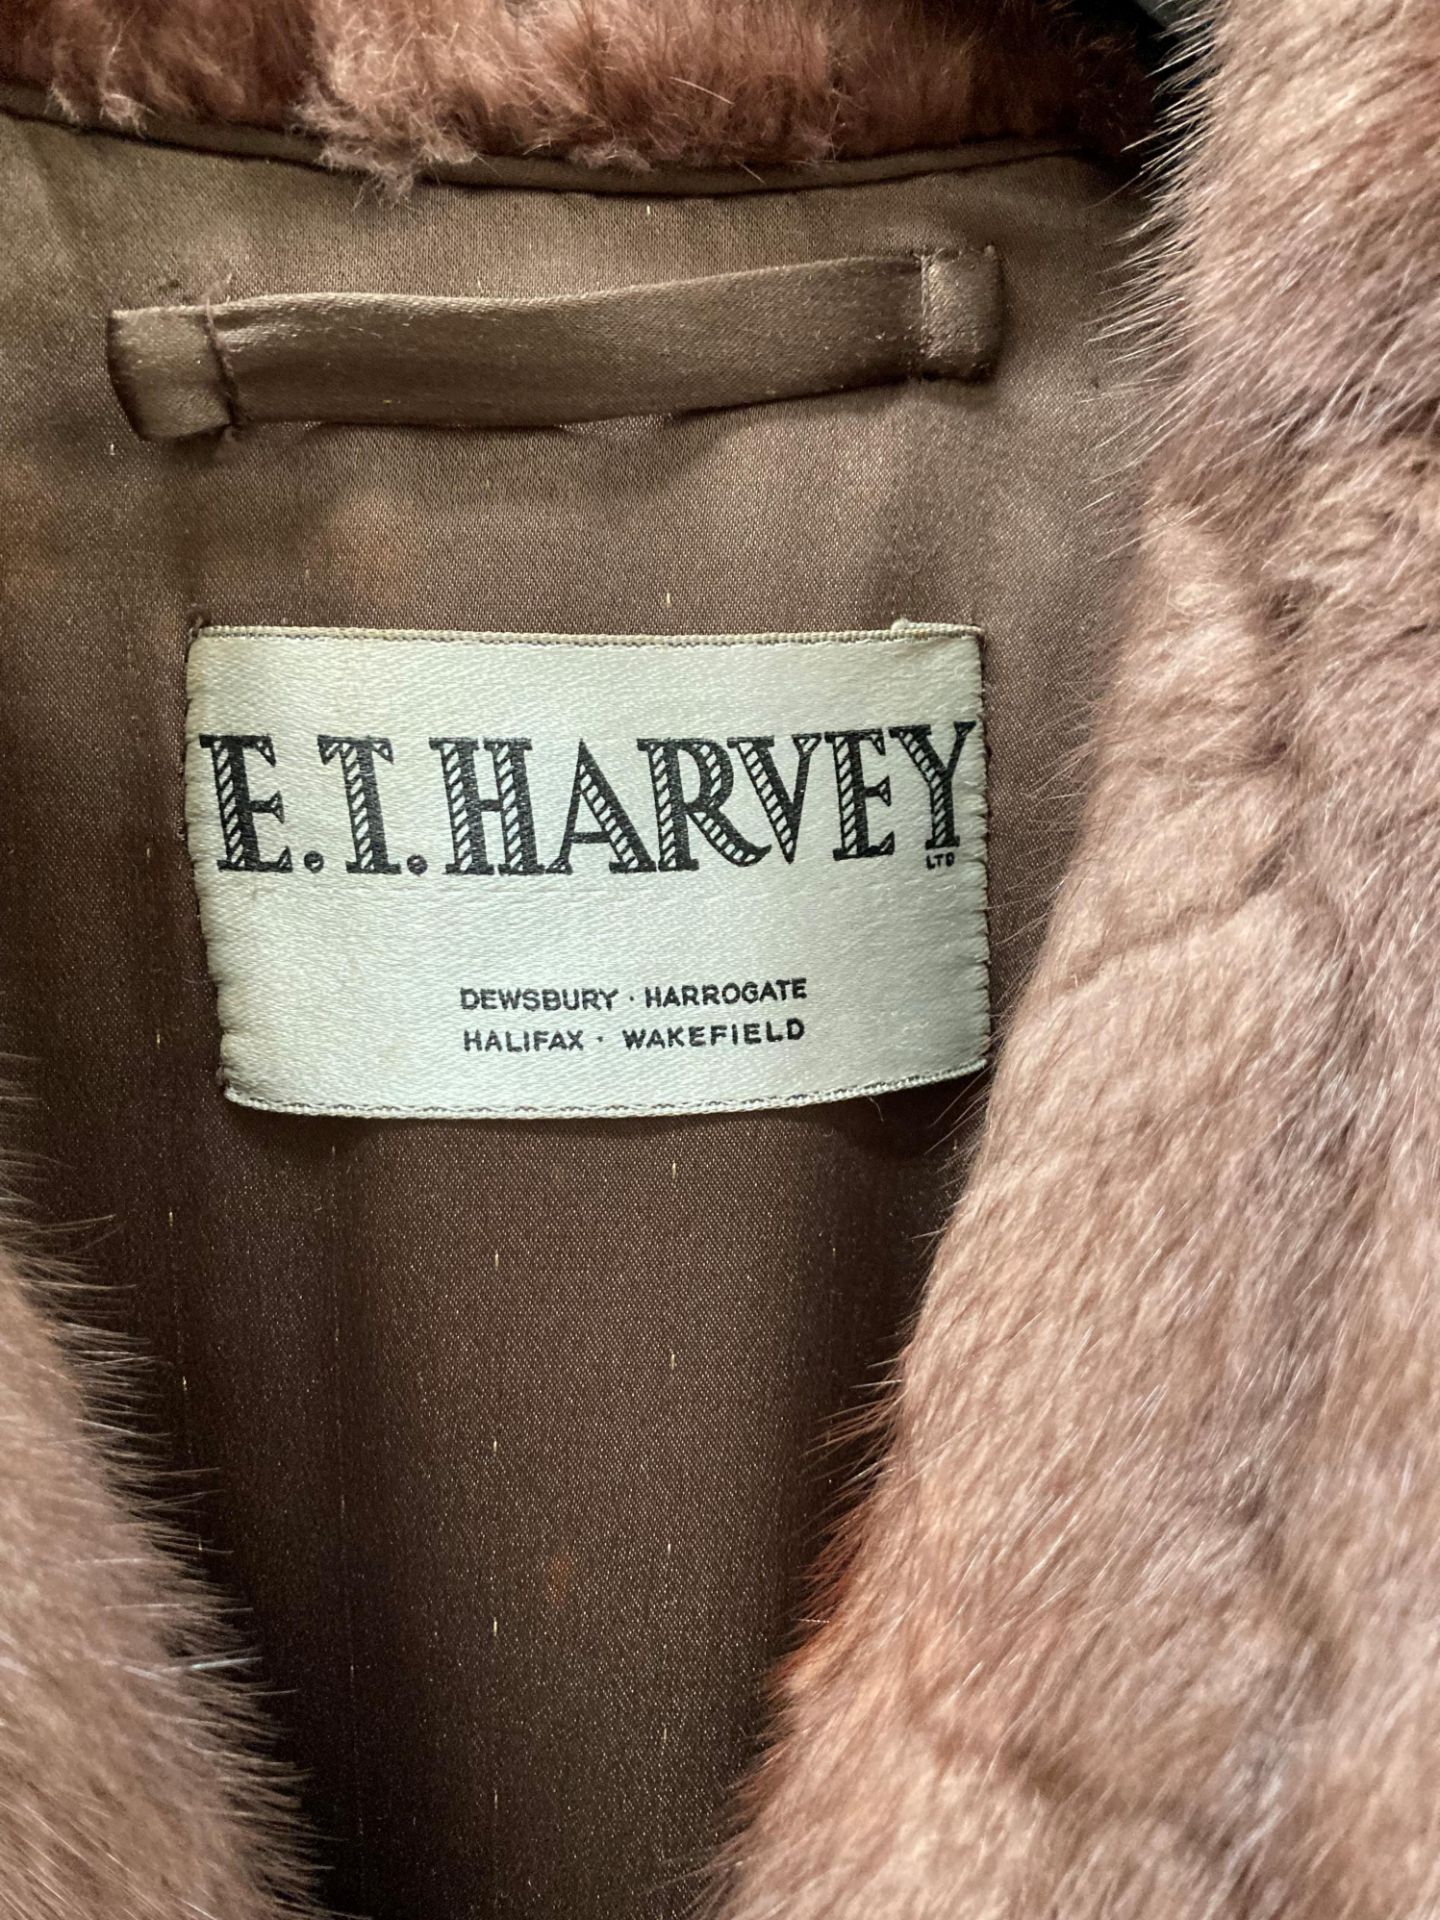 E T Harvey Ltd light brown fur long coat Further Information Staining to both lapels - Image 2 of 2